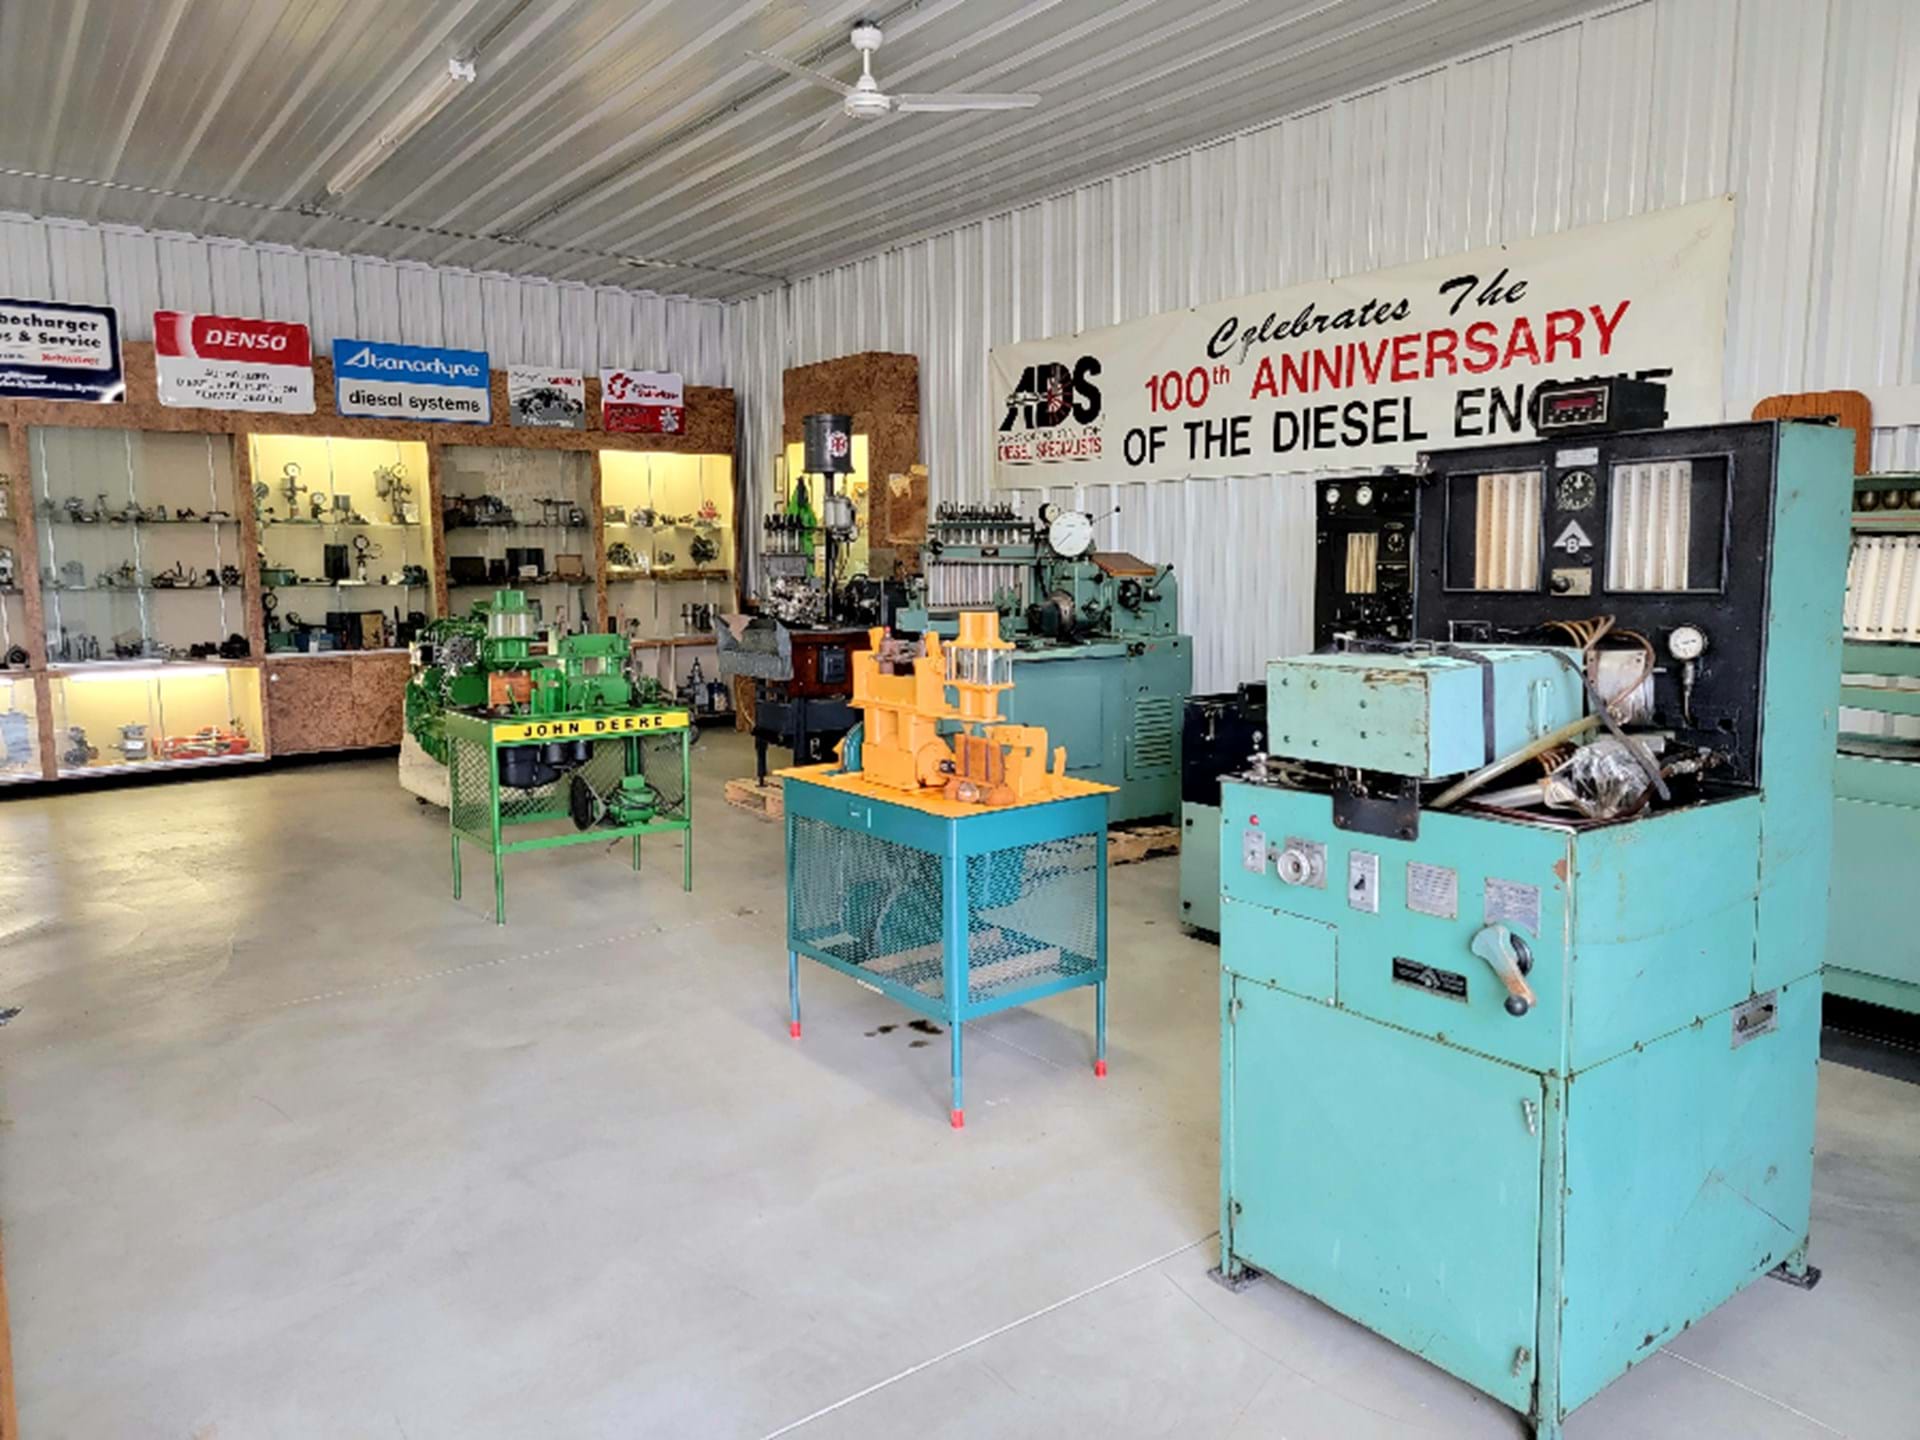 Museum of a wide variety of diesel engine equipment. Our collection includes tools, equipment, fuel injection parts, diesel pumps, nozzles, test stands, turbo cutaways,  memorabilia, and reference materials. Learn something new